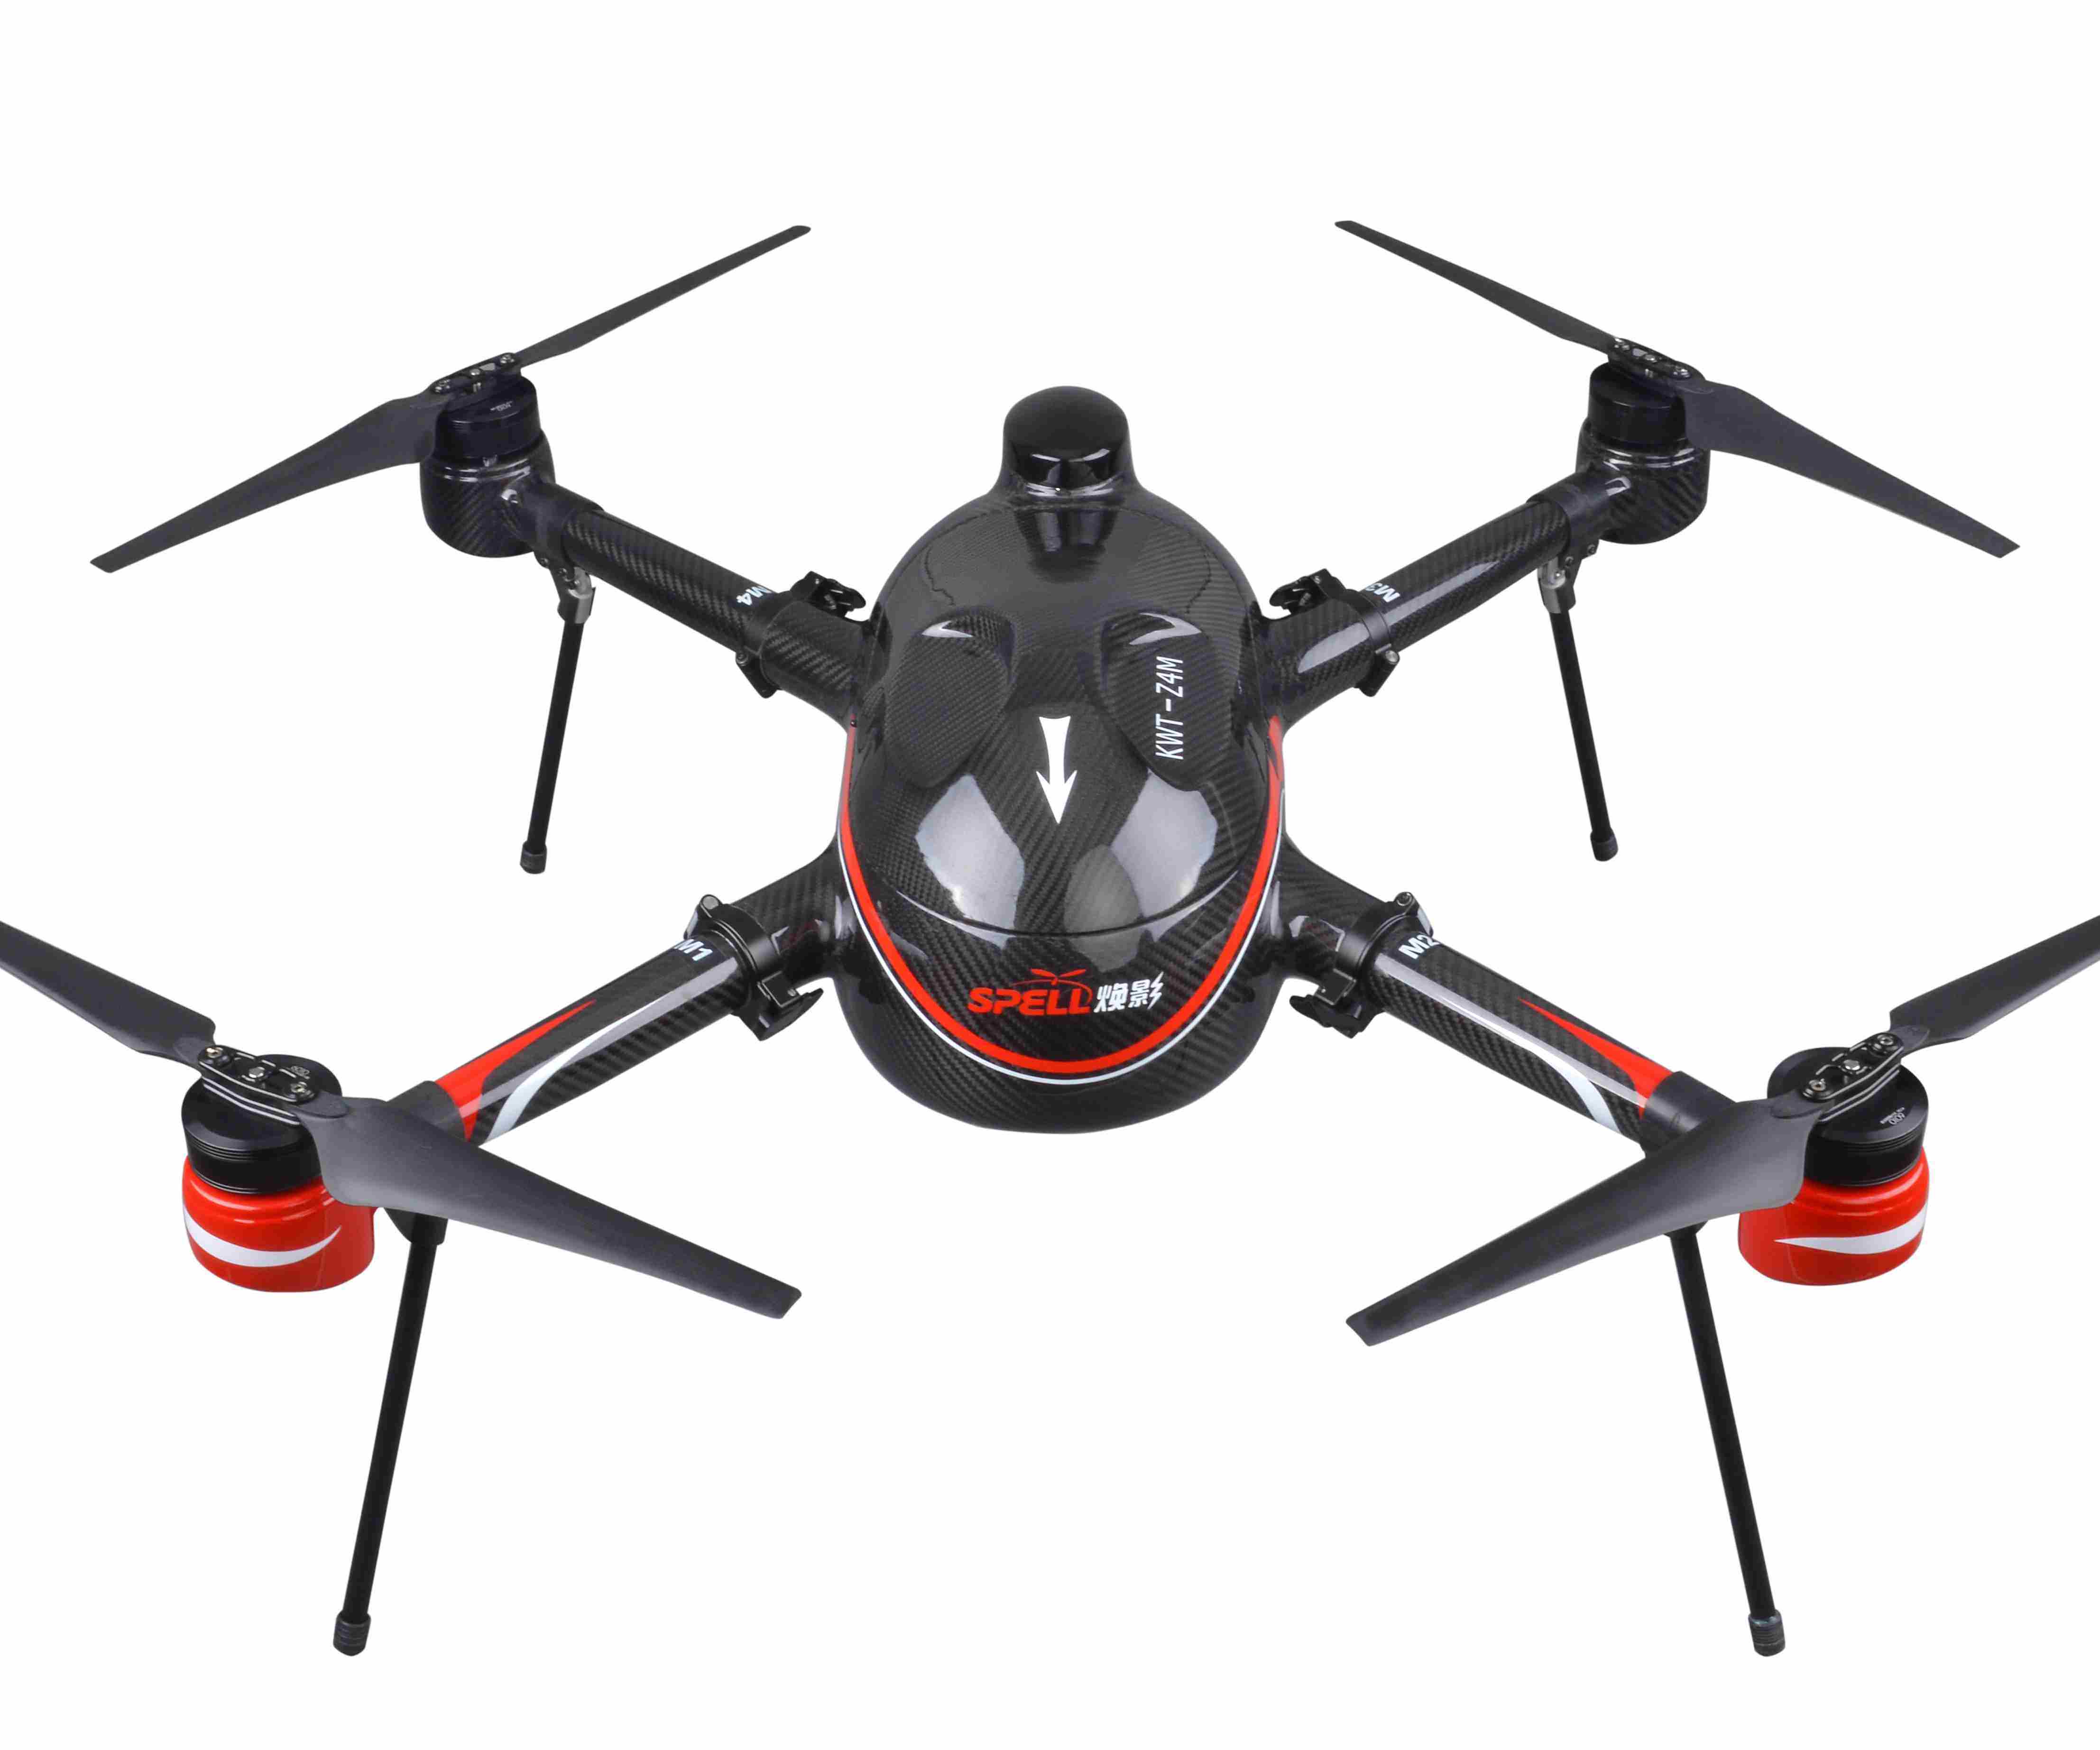 Low Price Long Flight Time Military and Police Uav Unmanned Aerial Vehicle Drone Quadcopter